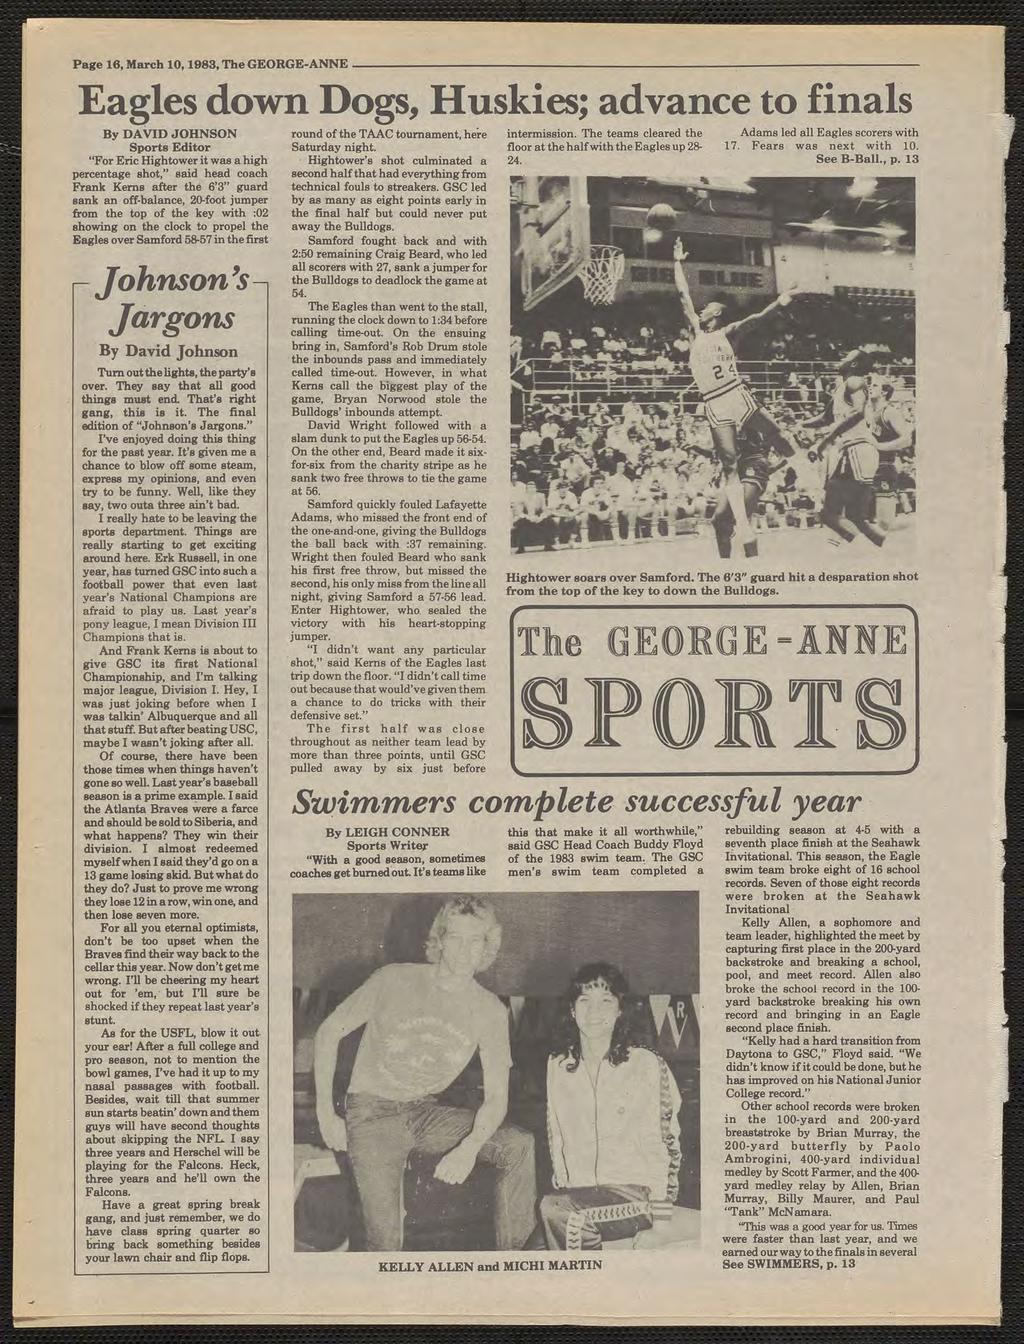 Page 16, March 10,1983, The GEORGE-ANNE Eagles down Dogs, Huskes; advance to fnals By DAVID JOHNSON Sports Edtor "For Erc Hghtower t was a hgh percentage shot," sad head coach Frank Kerns after the